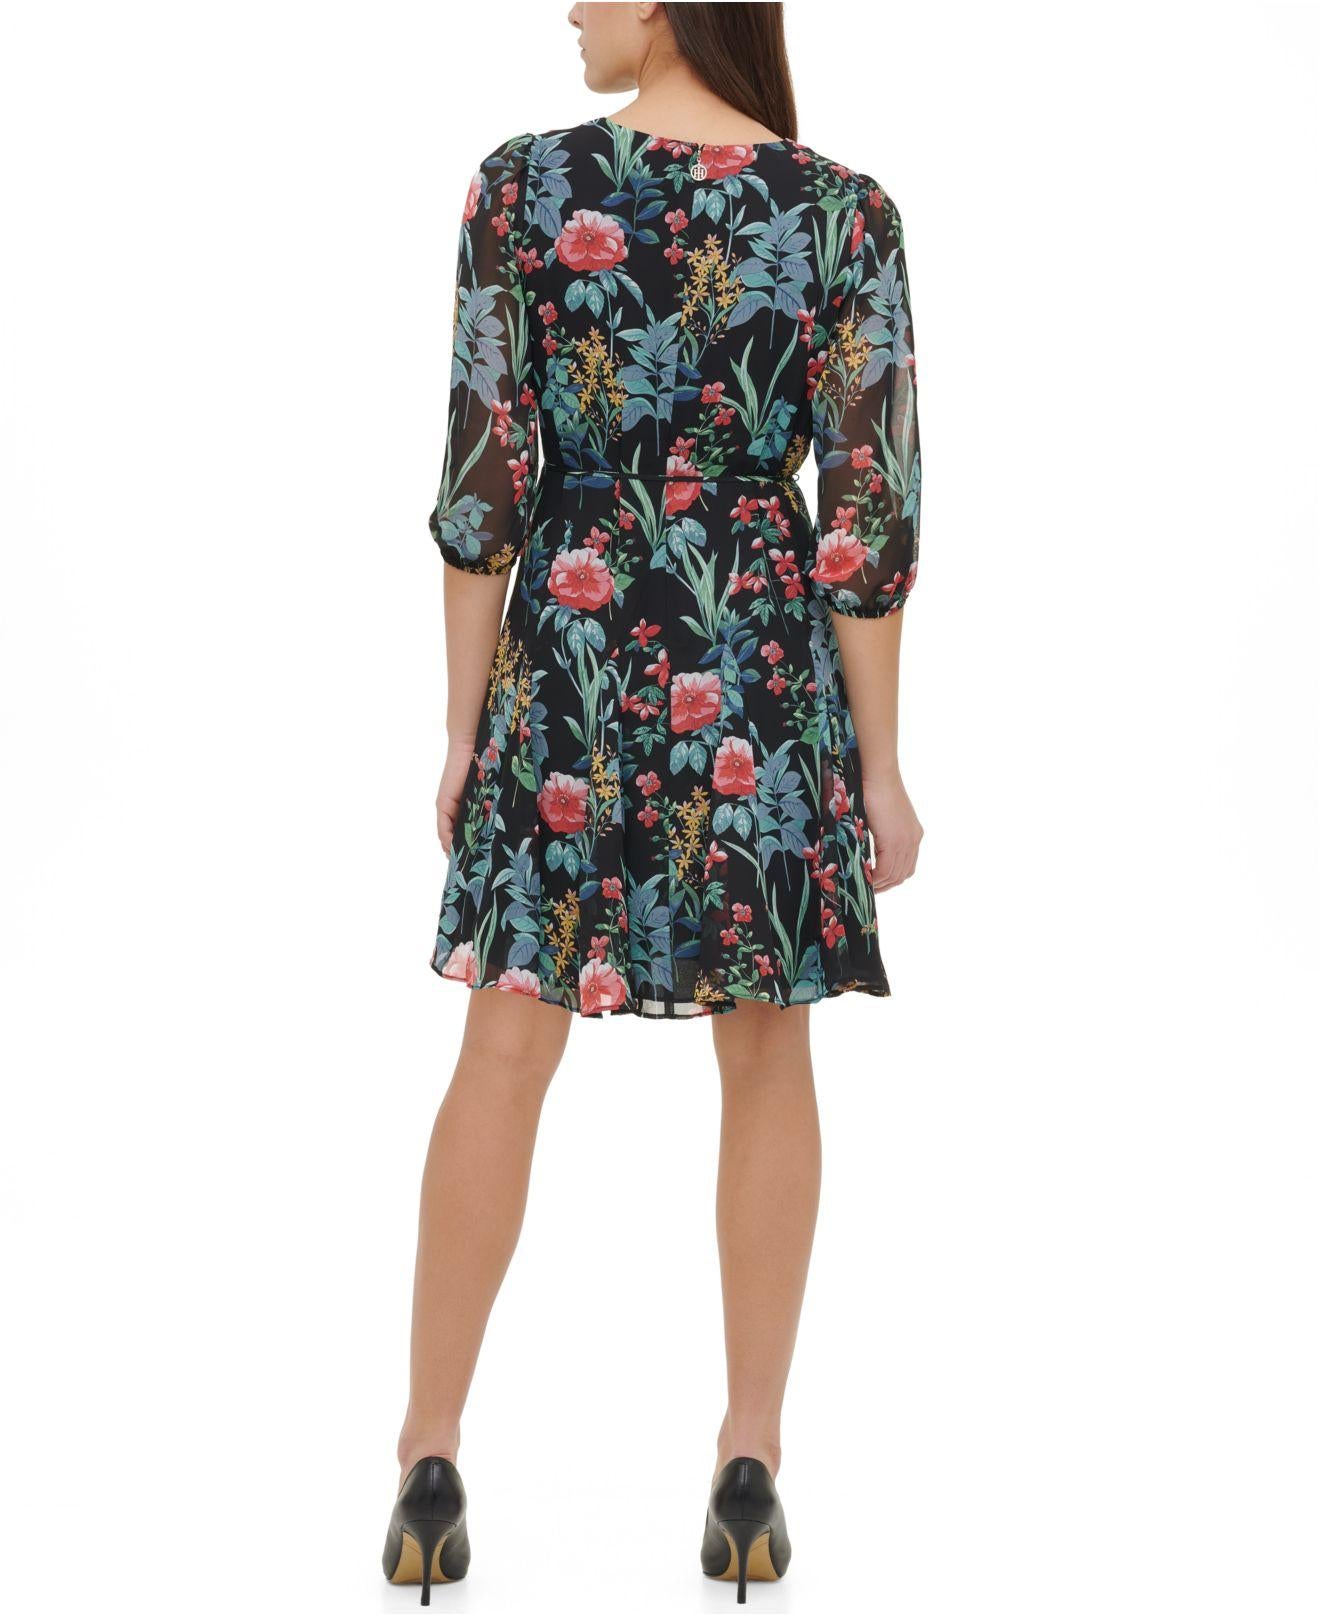 TOMMY HILFIGER Womens Black Ruffled Tie Floral 3/4 Sleeve Crew Neck Short Cocktail Fit + Flare Dress 2